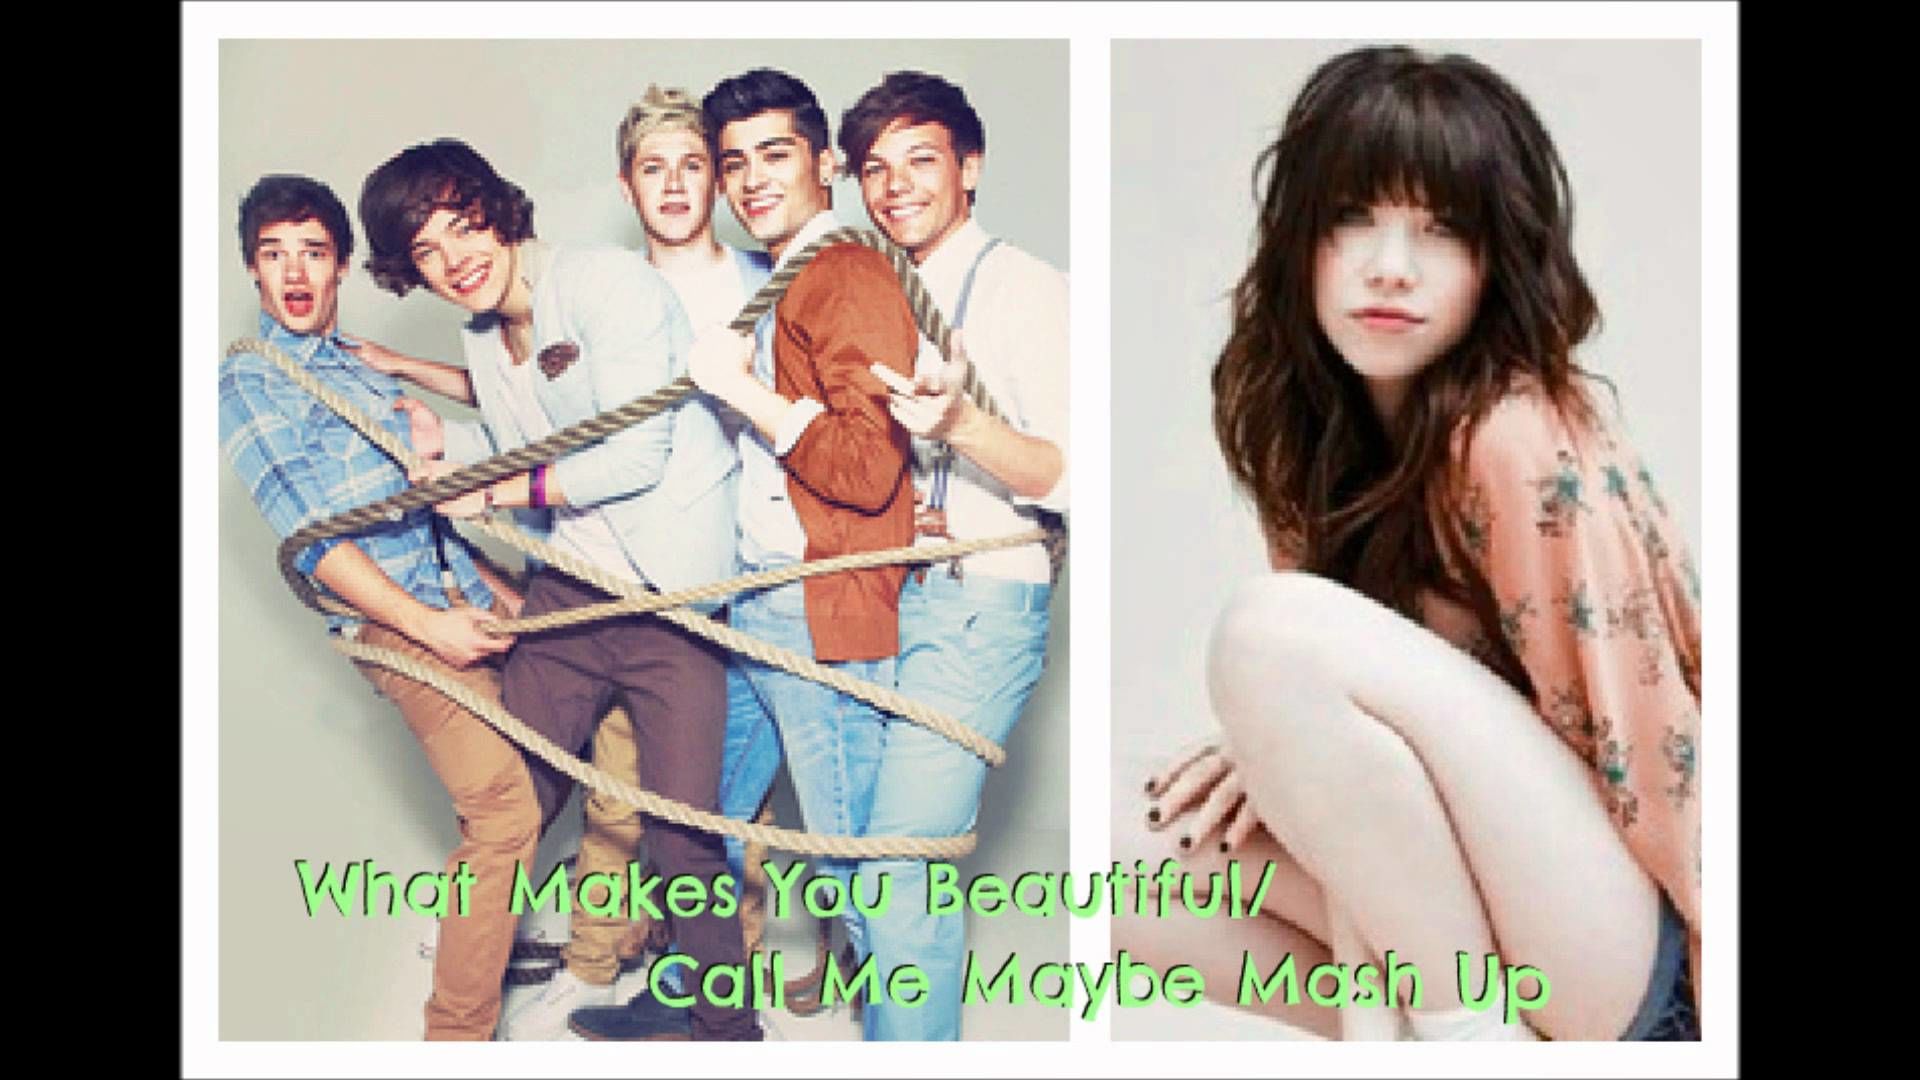 One Direction & Carly Rae Jepsen - What Makes You Beautiful   Call Me Maybe [Mashup] (신남, 흥겨움, 경쾌, 활기, 발랄)